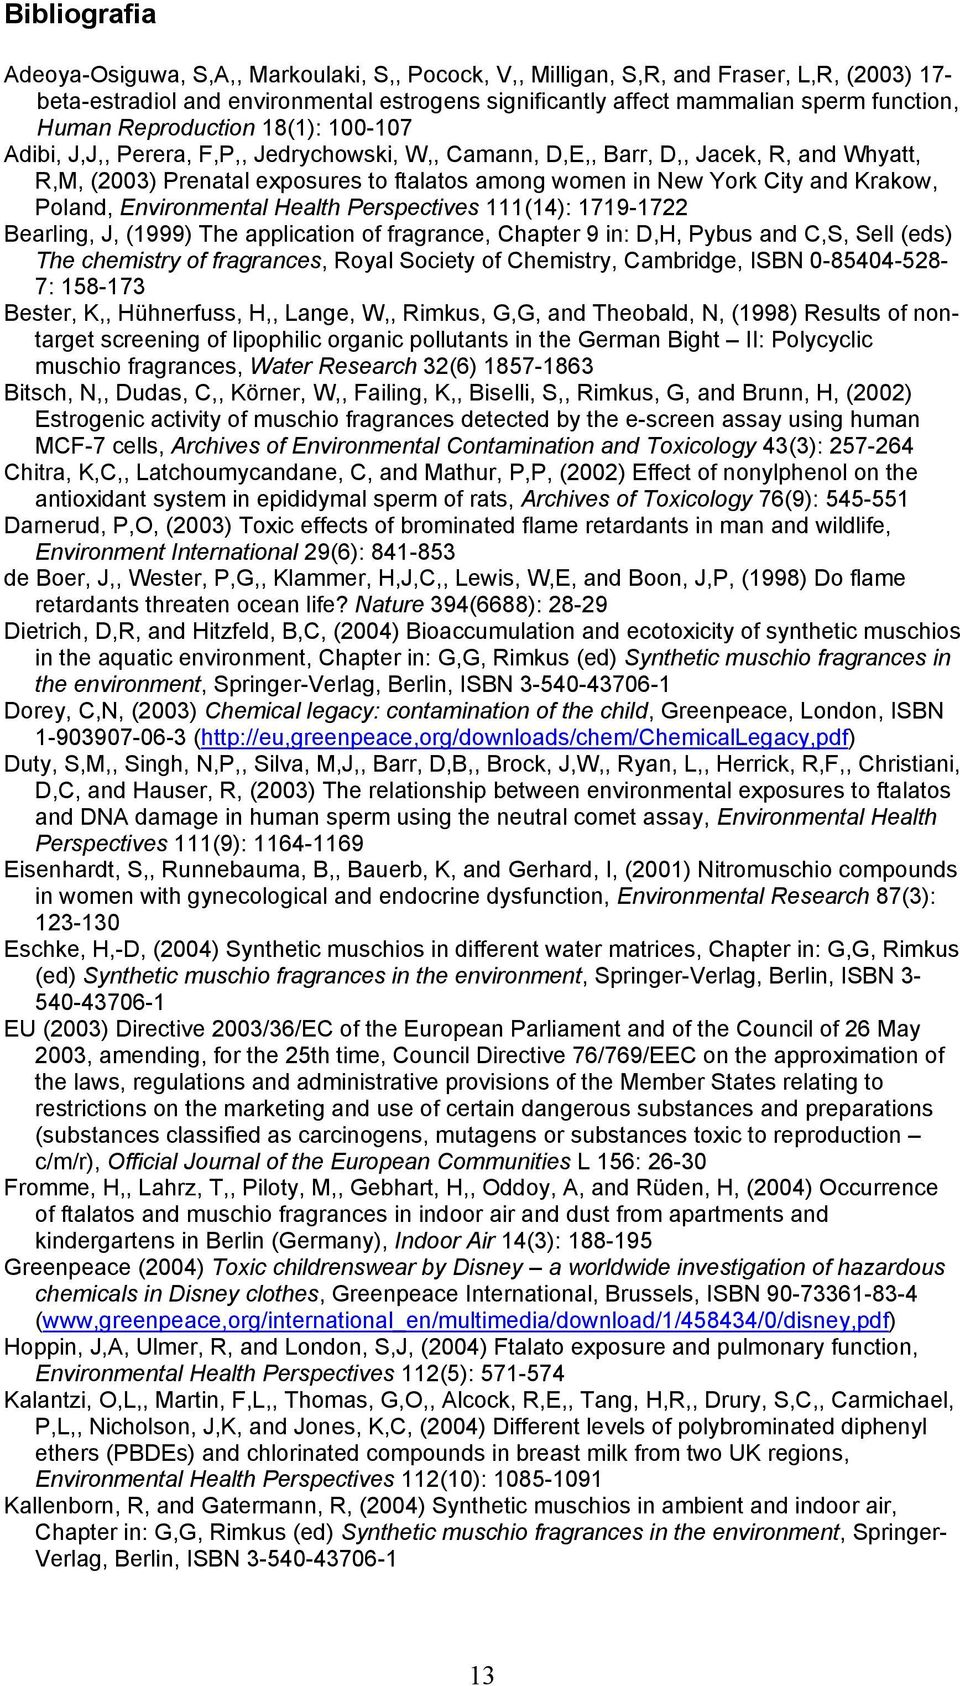 and Krakow, Poland, Environmental Health Perspectives 111(14): 1719-1722 Bearling, J, (1999) The application of fragrance, Chapter 9 in: D,H, Pybus and C,S, Sell (eds) The chemistry of fragrances,